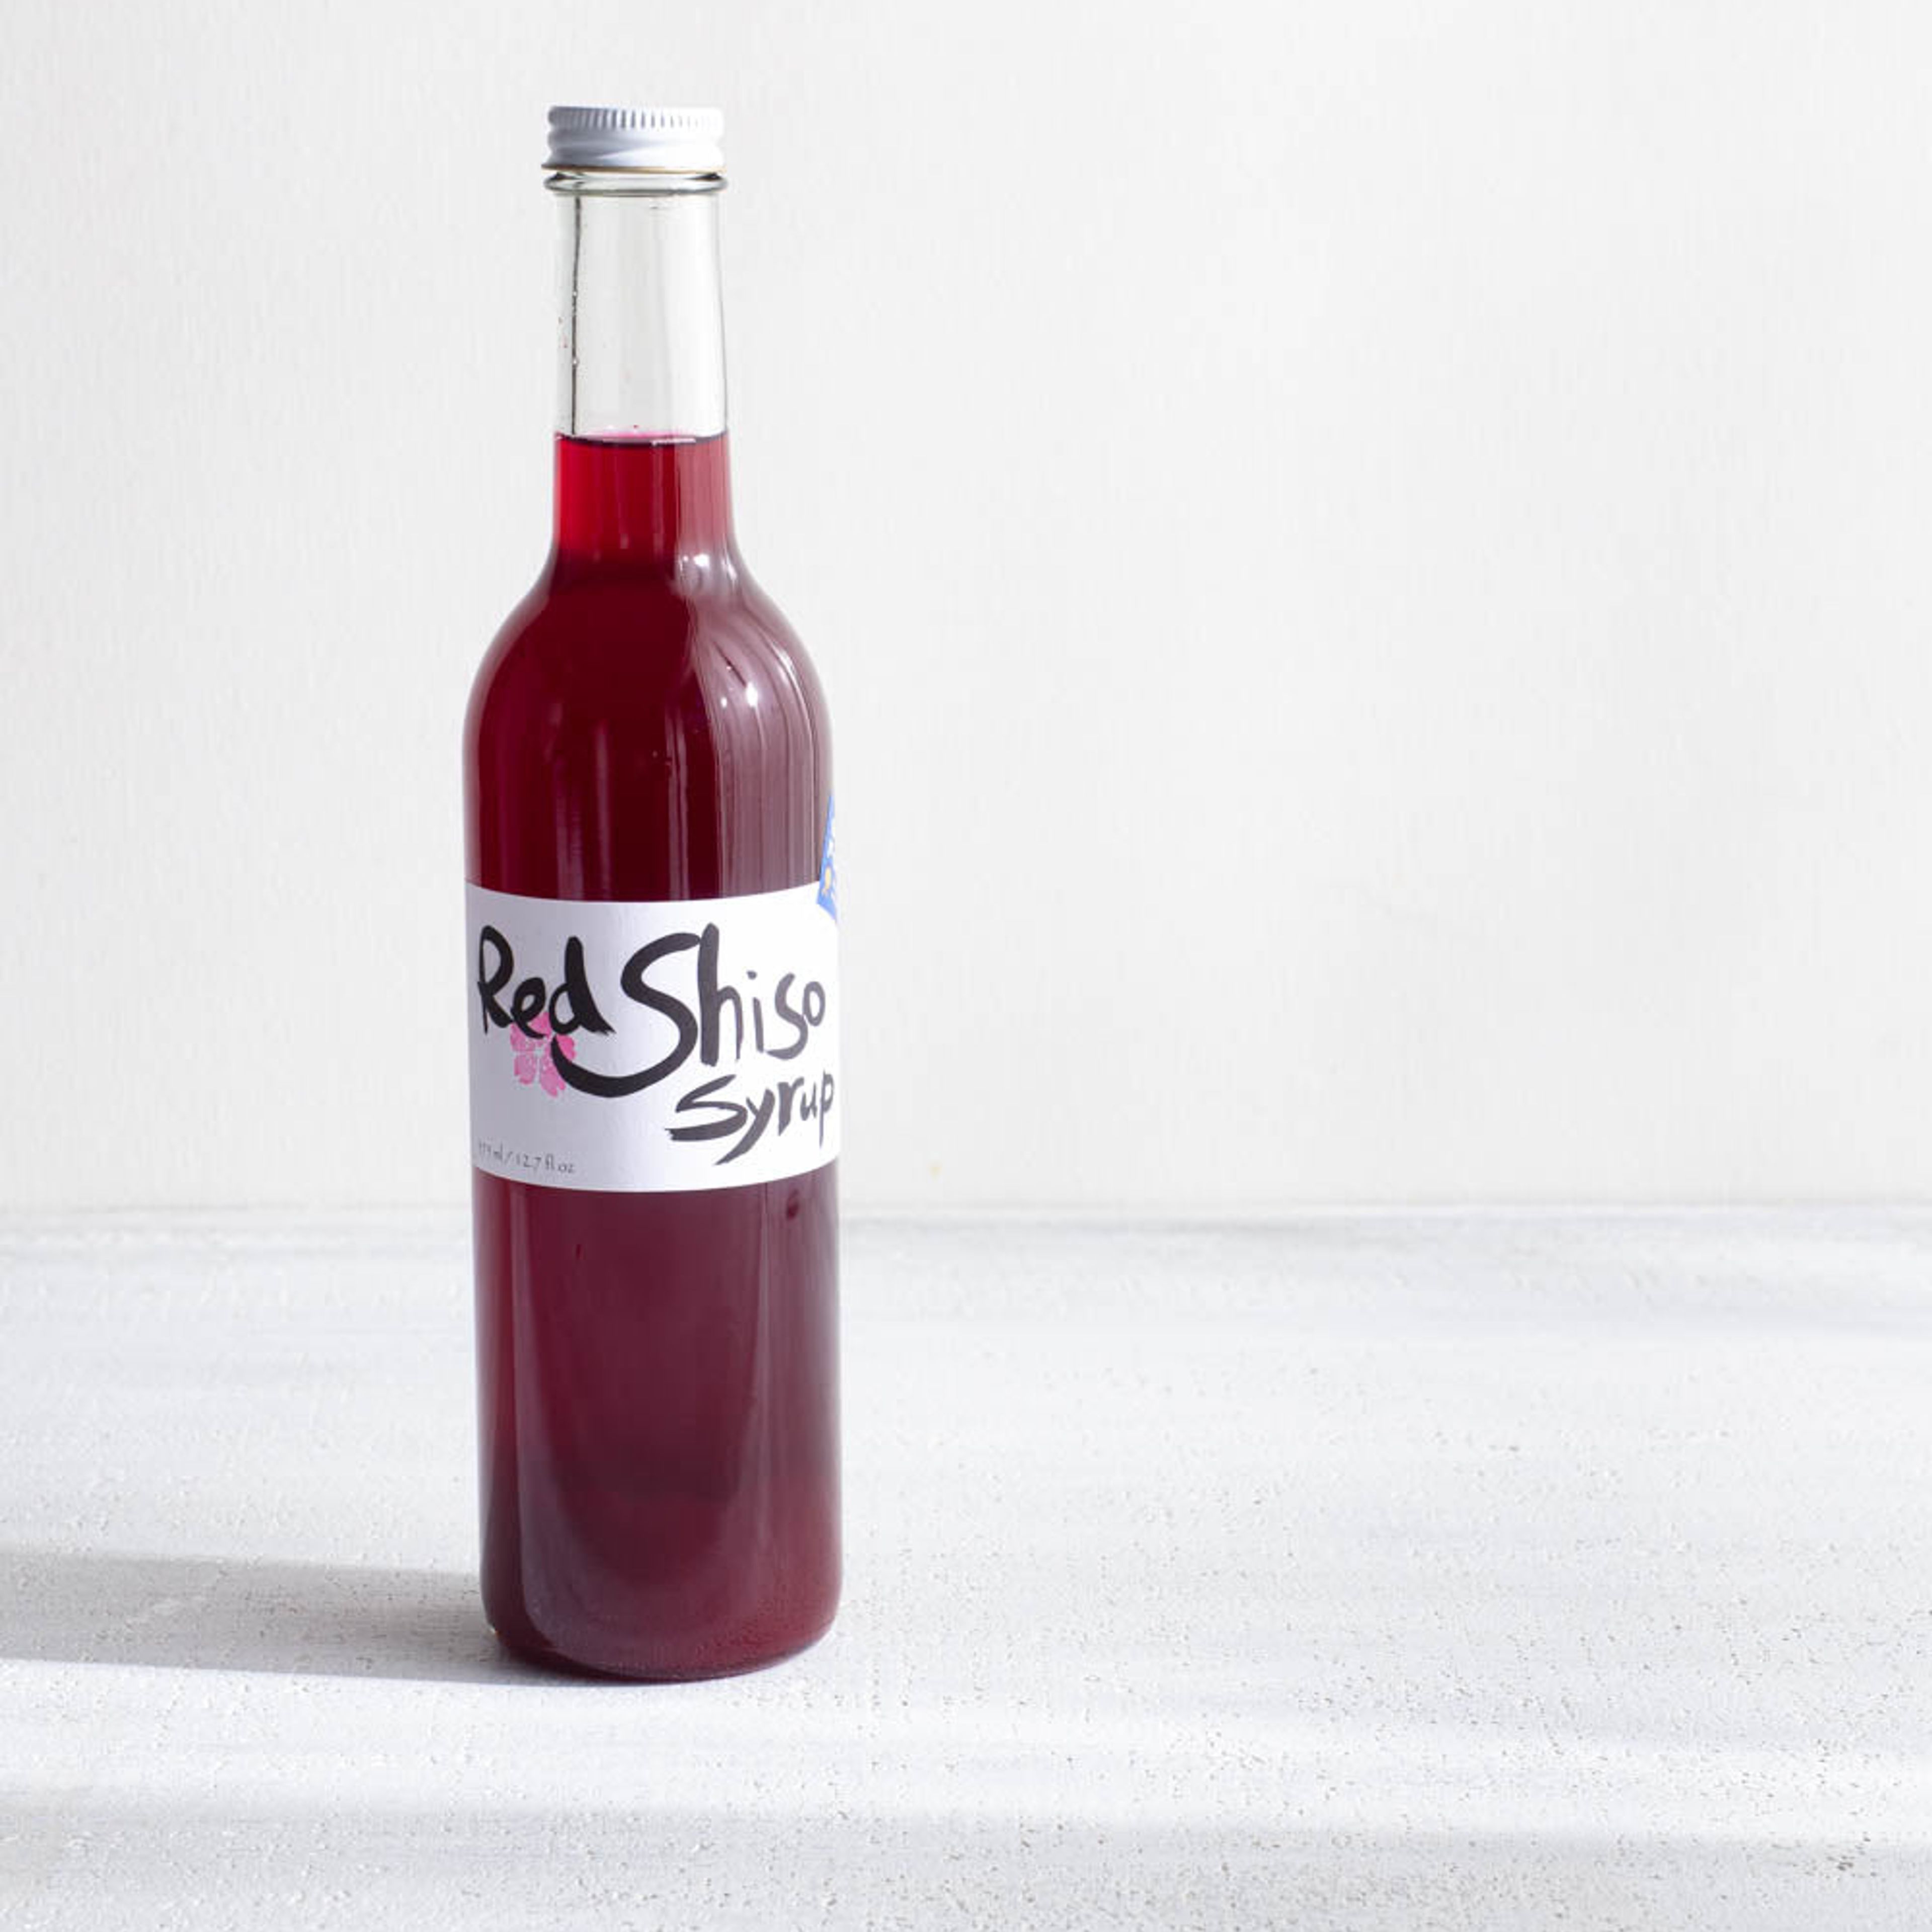 Red Shiso Syrup